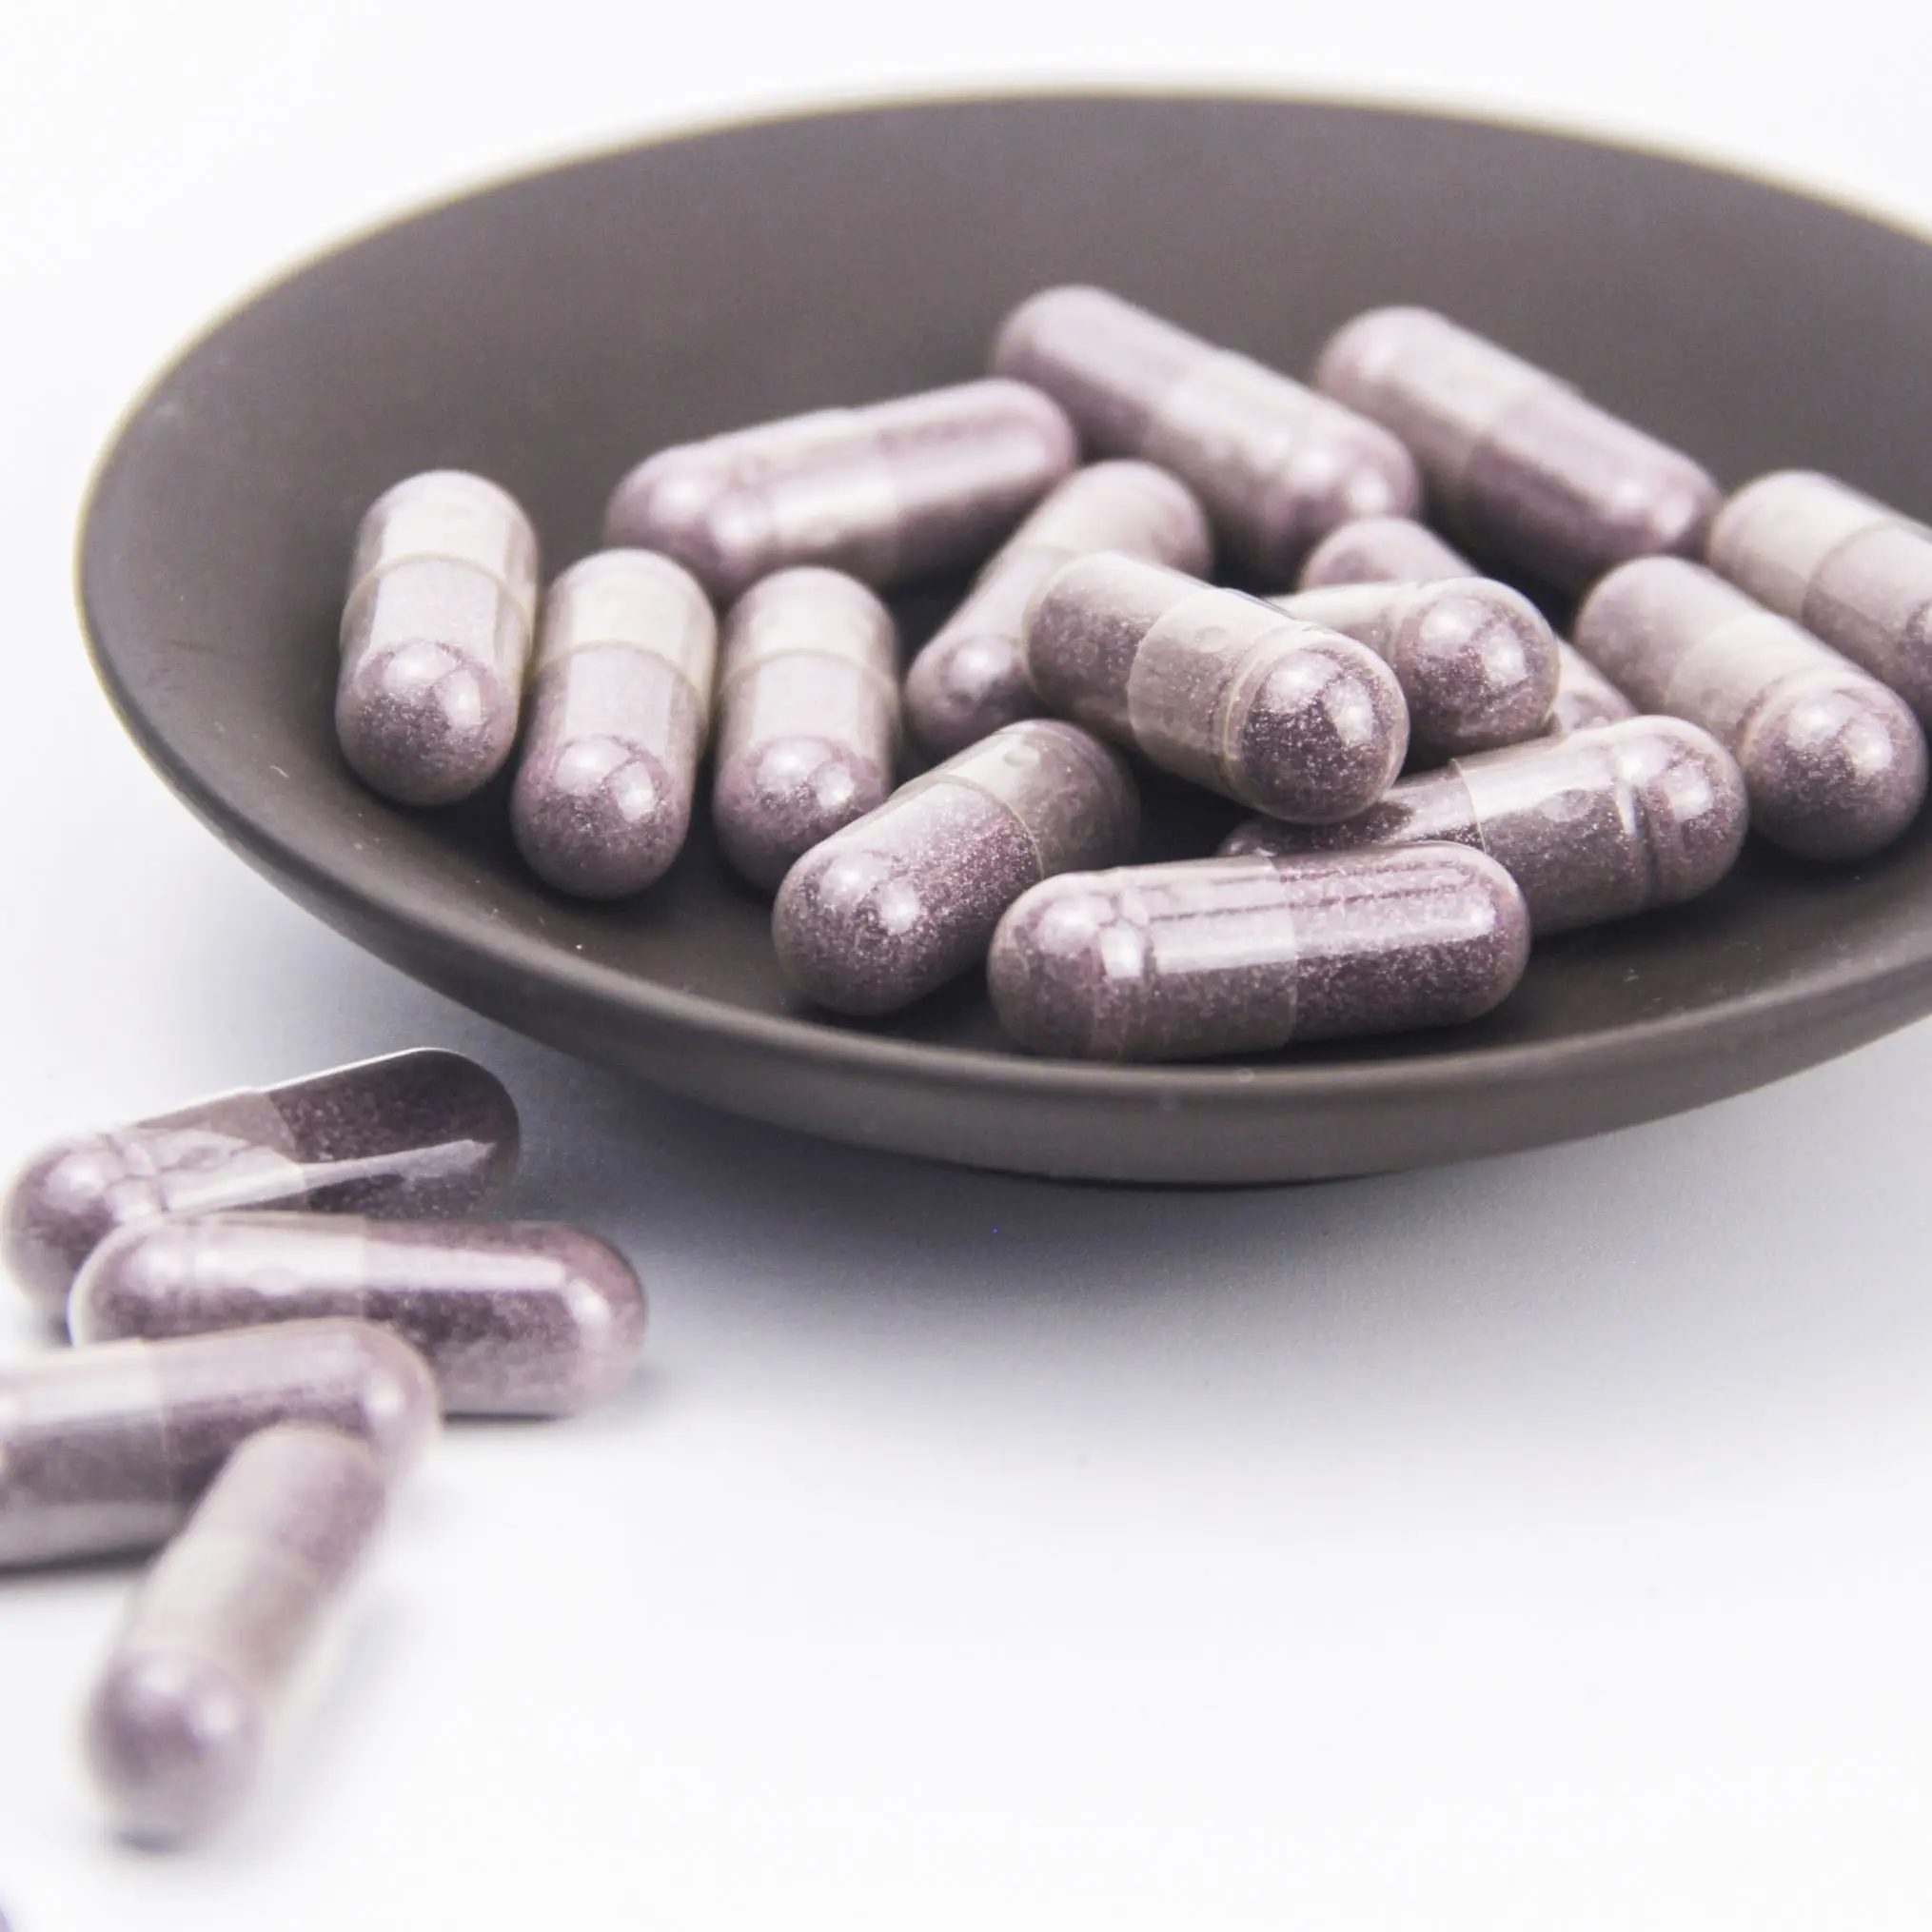 Top Sale Capsules Natural Supplements acai berry capsules for sale